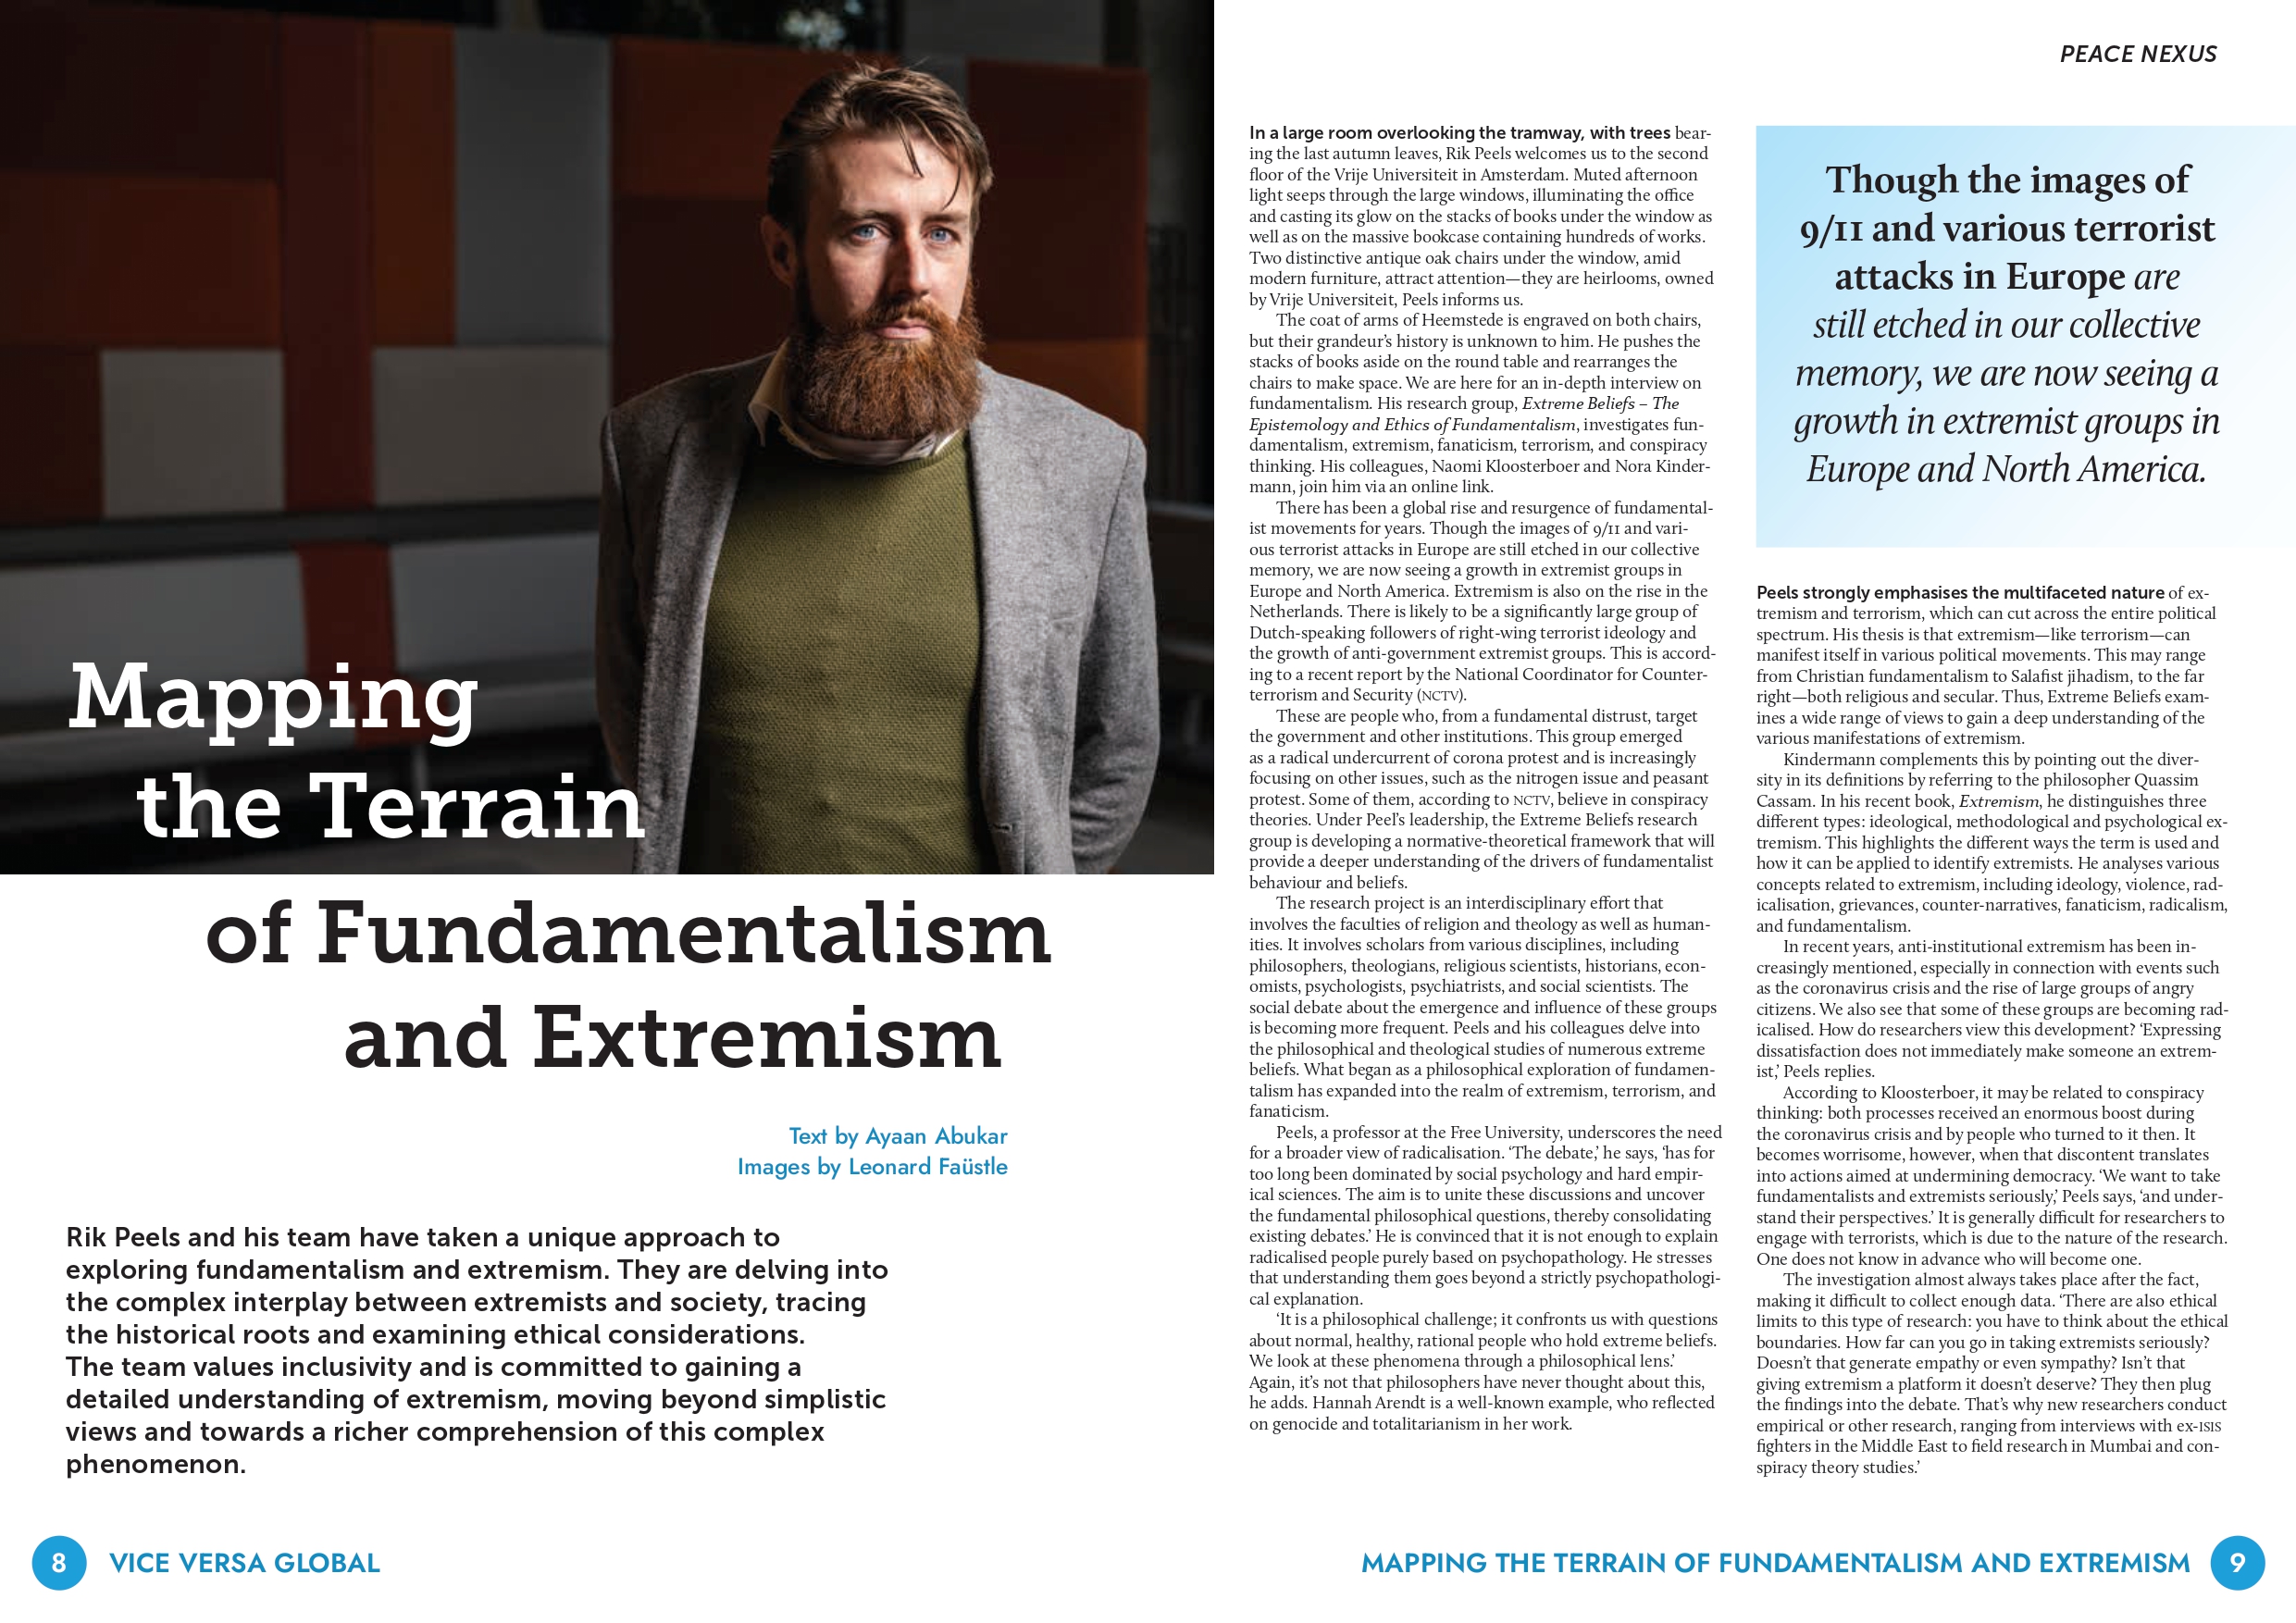 ‘Mapping the Terrain of Fundamentalism and Extremism’ article in Vice Versa